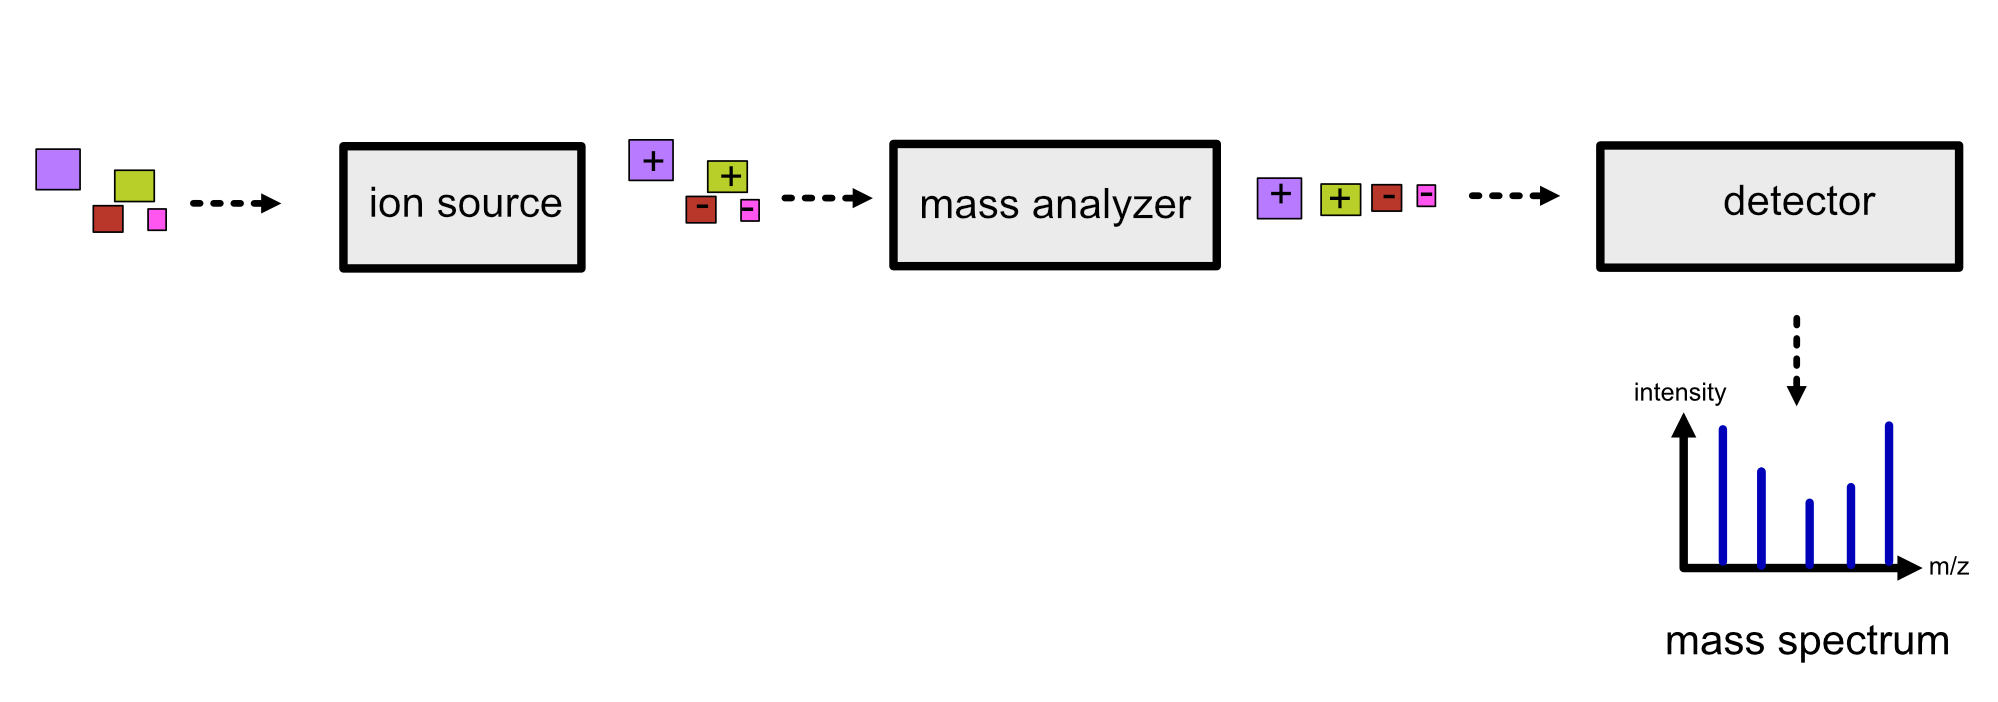 _images/mass-spectrometry-components.png